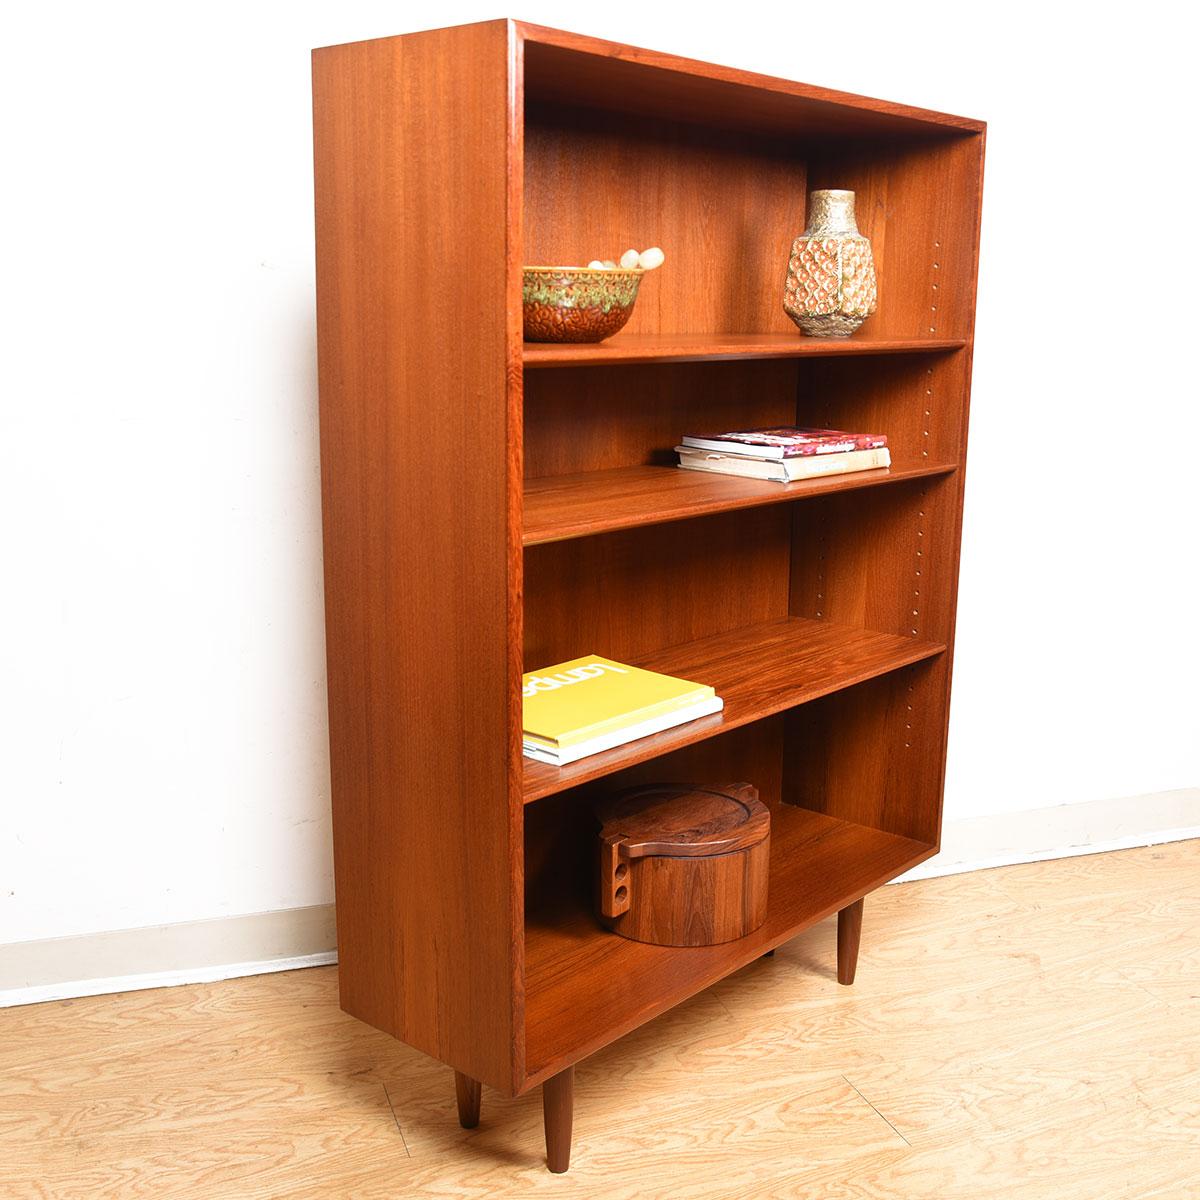 Danish Teak Adjustable Shelf Bookcase by Borge Mogensen

Additional information:
Material: Teak
Featured at Kensington:
Compact & functional with old school adjustable beveled shelves.

Dimension: W 39.25? x D 12.5? x H 52.5?